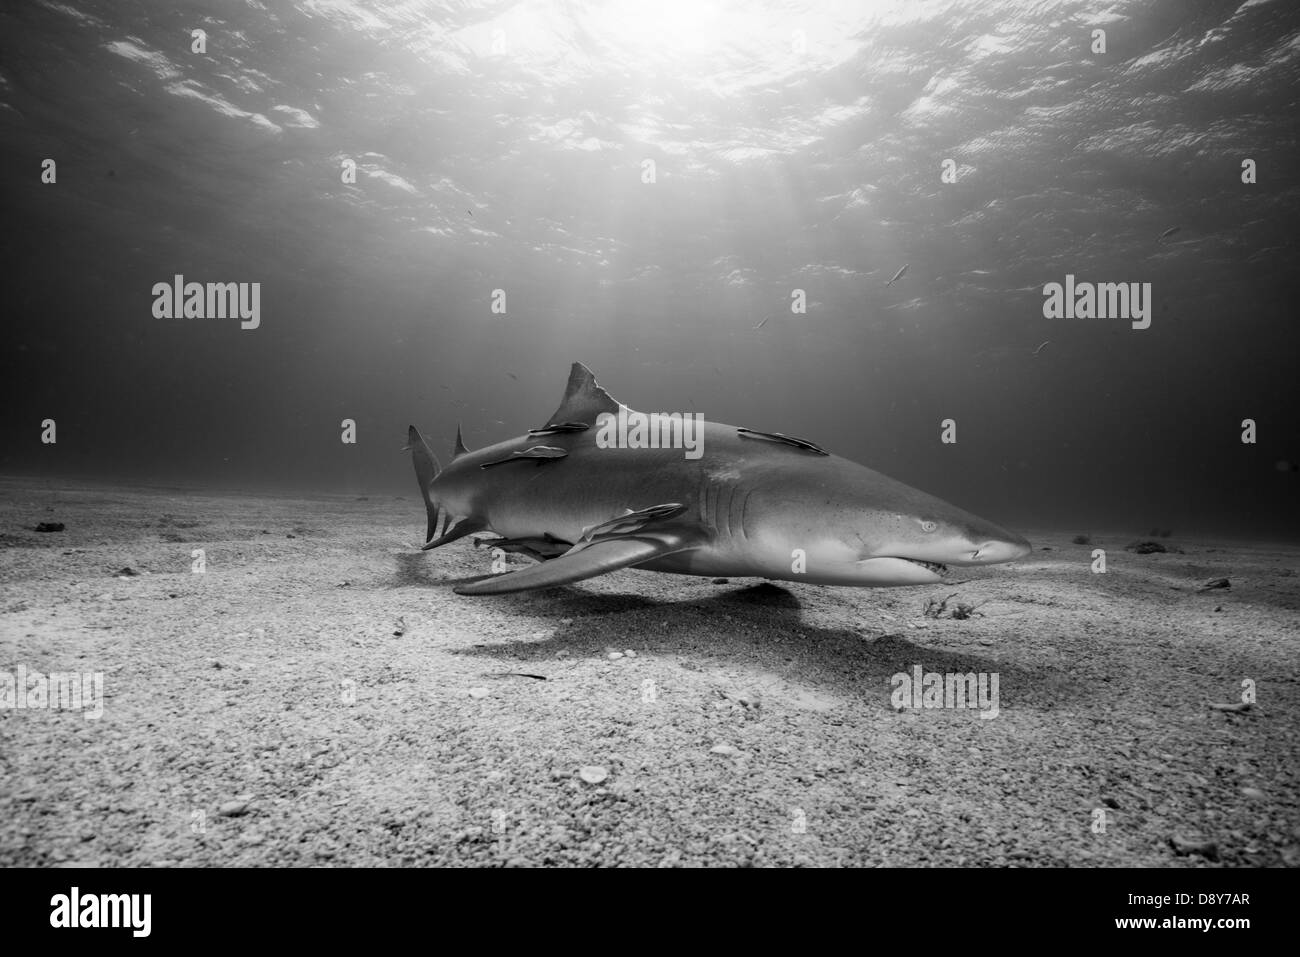 Ocean Black and White Stock Photos & Images - Alamy